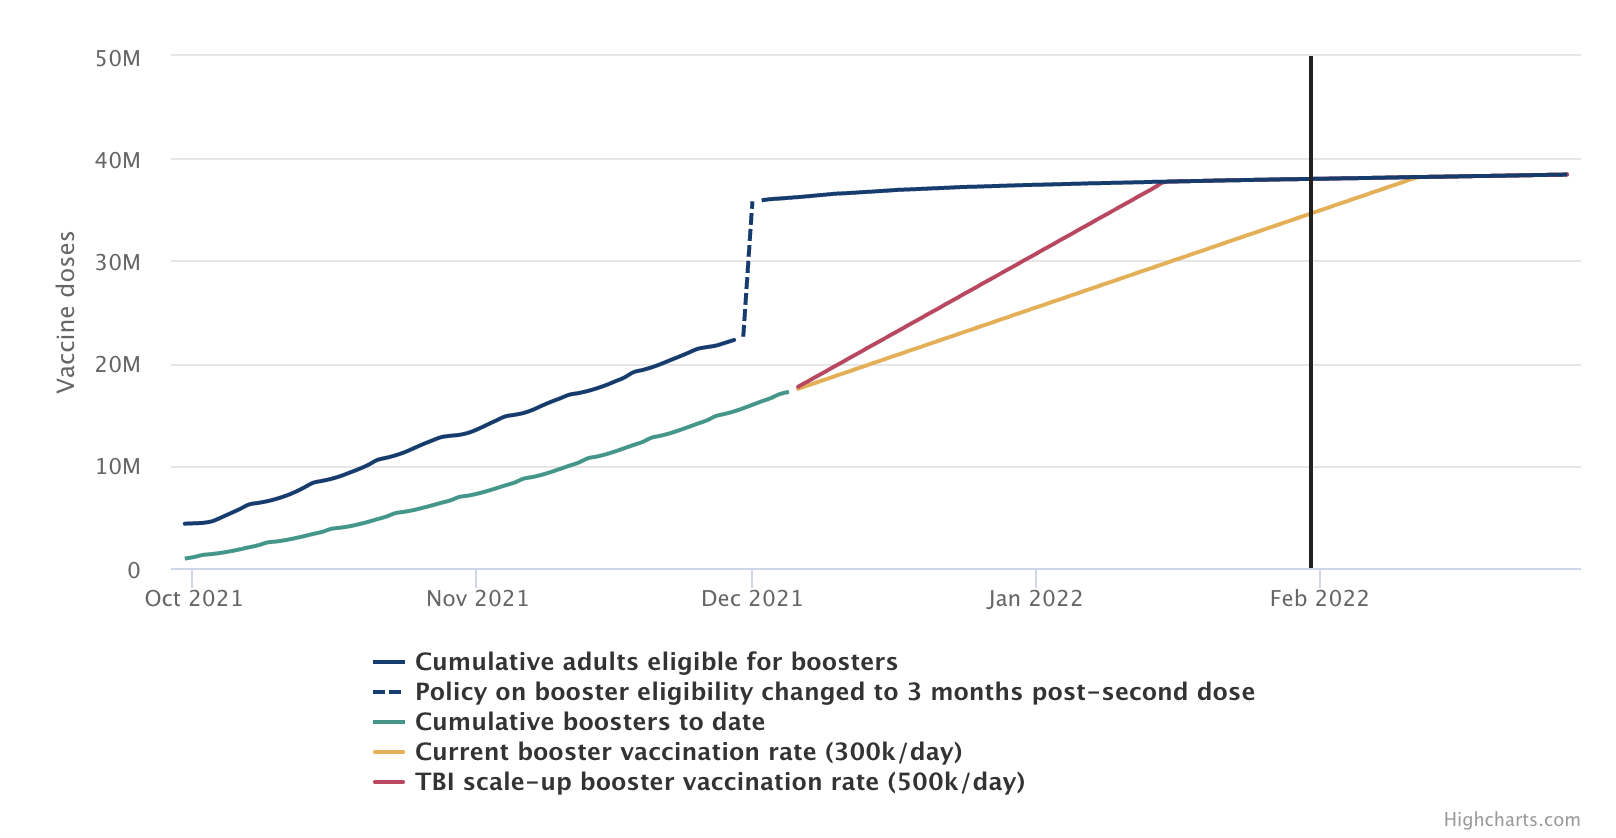 Scale-up in boosters vaccination needed in England to vaccinate all eligible adults by 31 January 2022